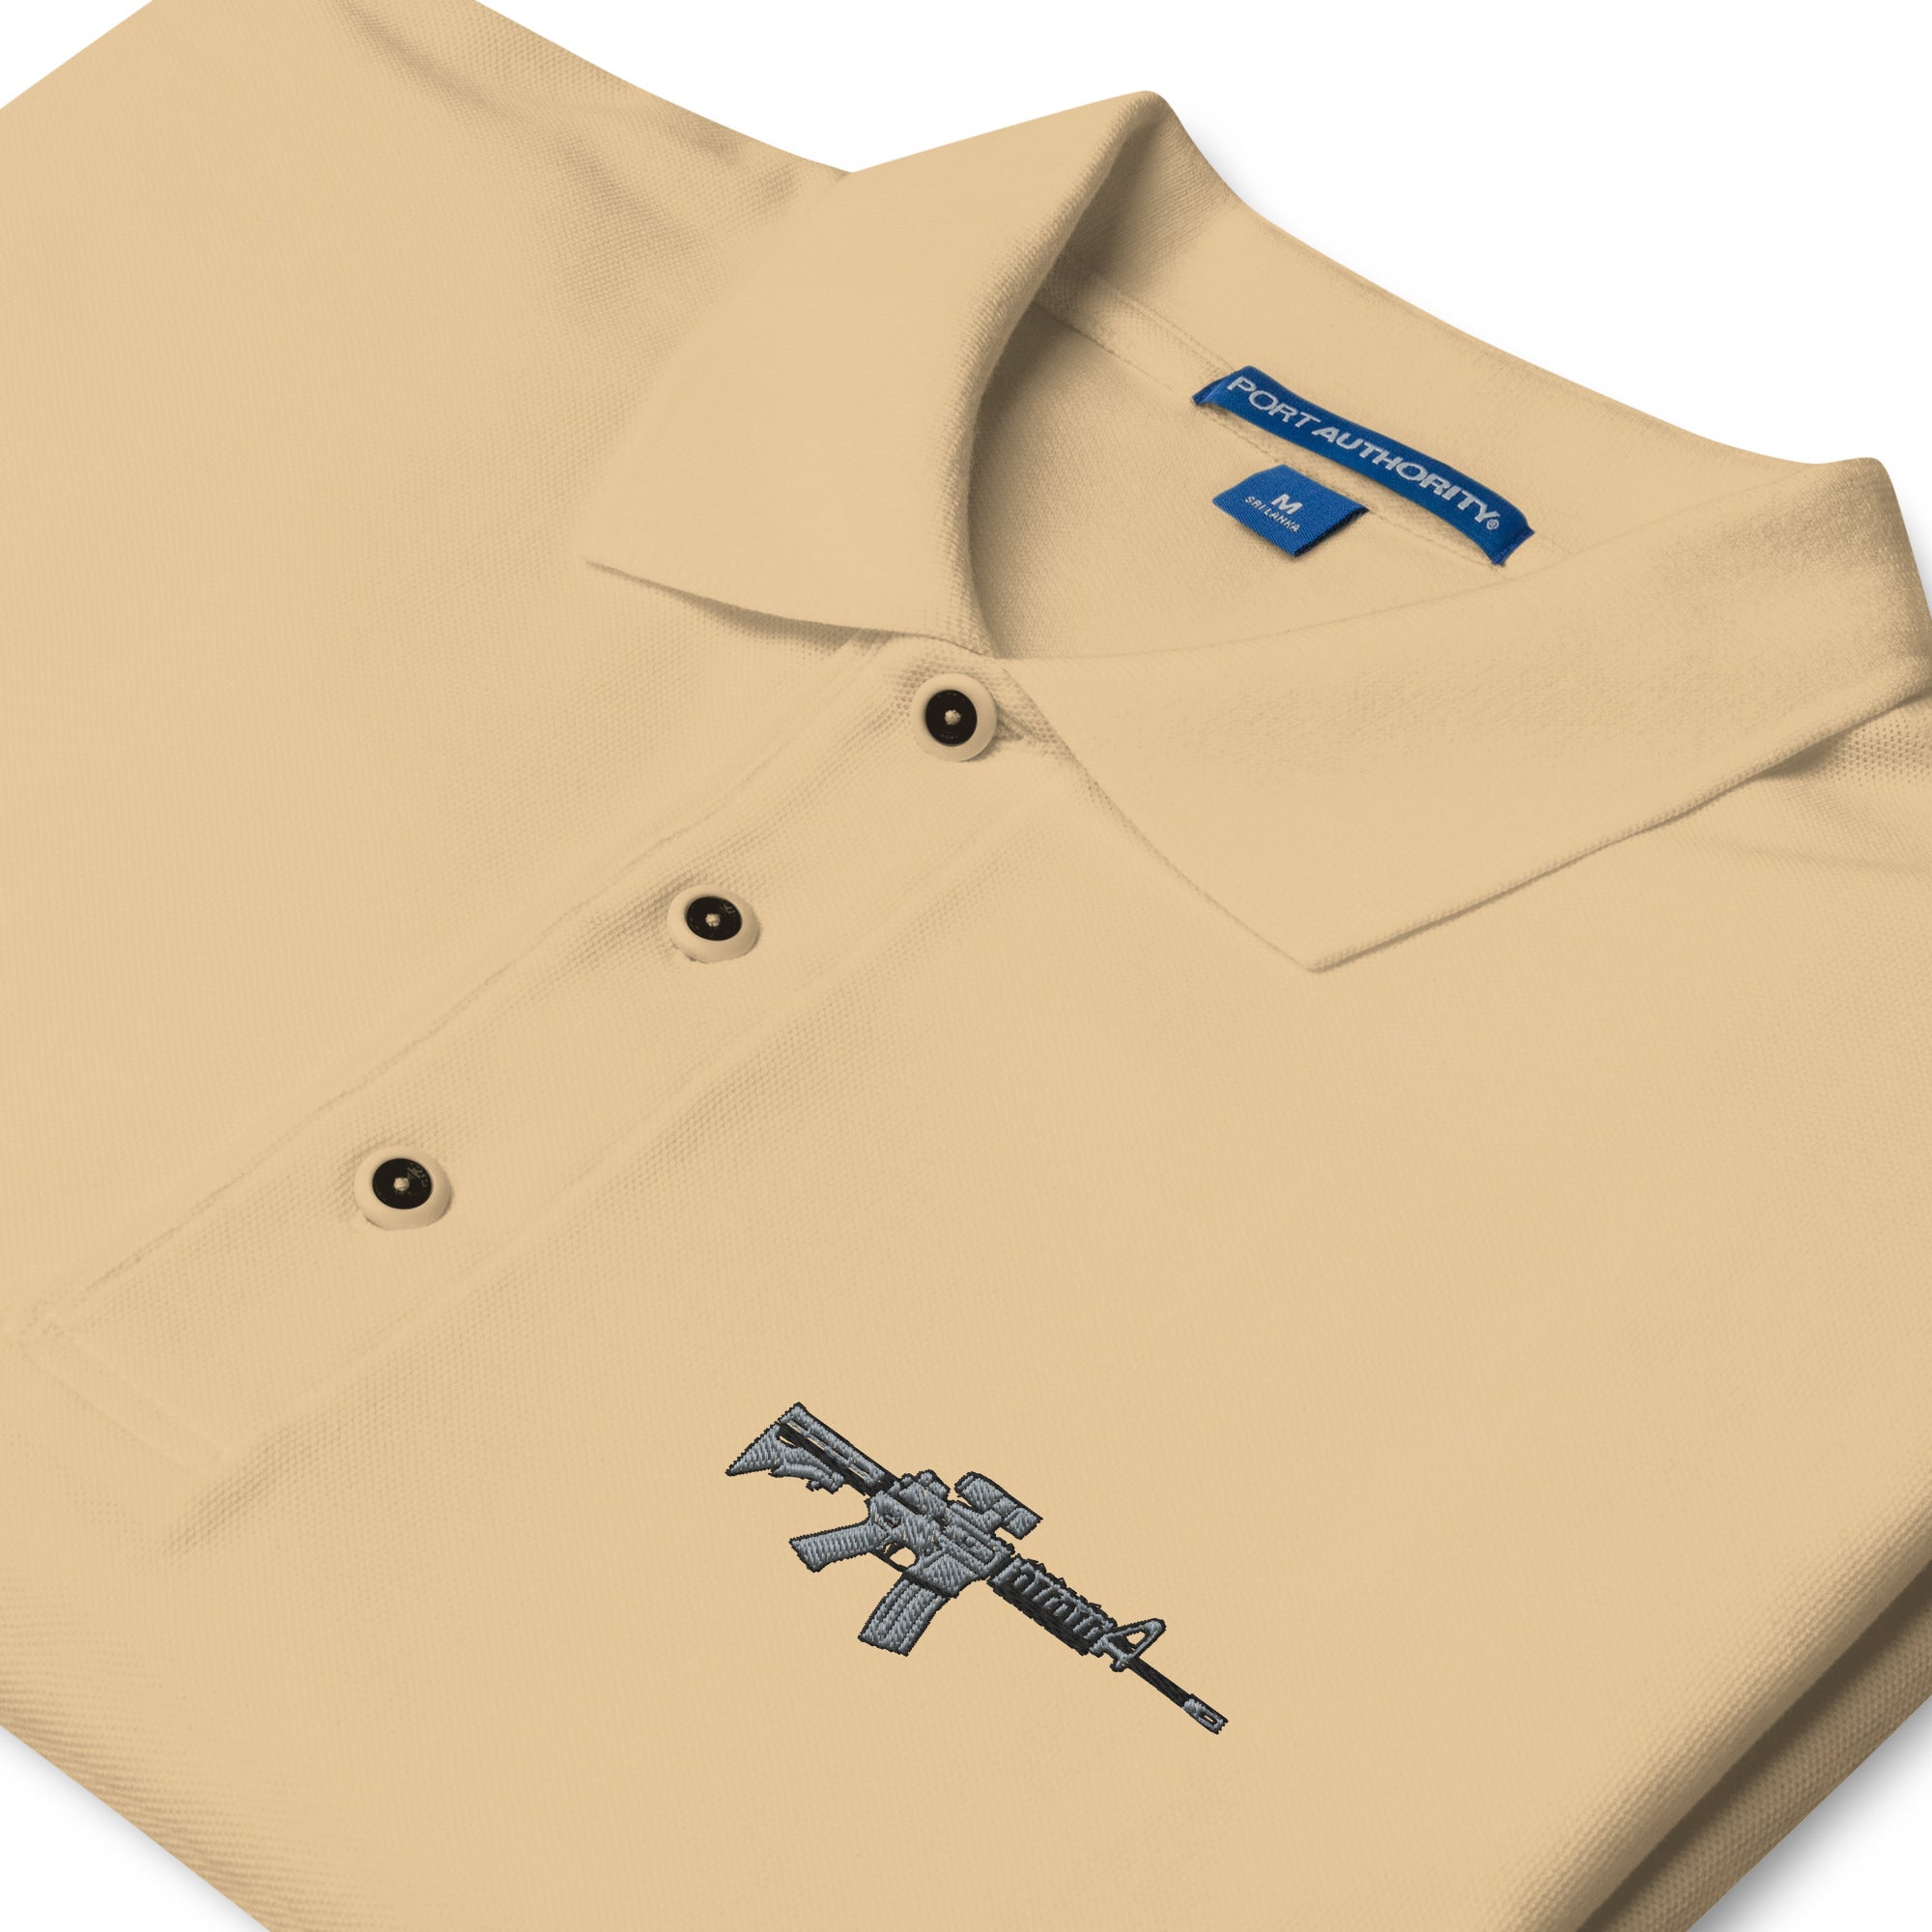 AR-15 Embroidered Men's Polo